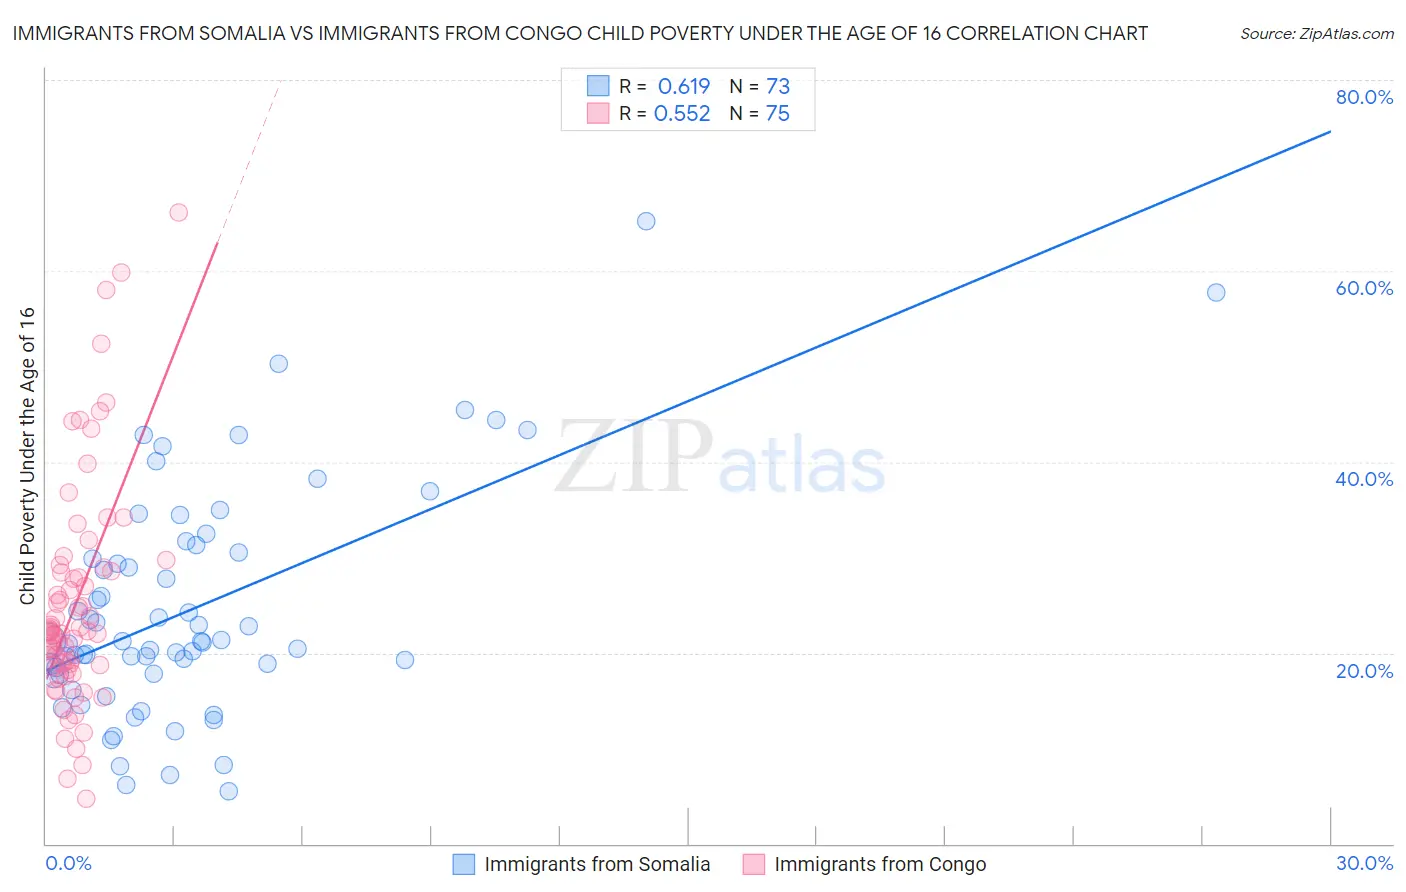 Immigrants from Somalia vs Immigrants from Congo Child Poverty Under the Age of 16